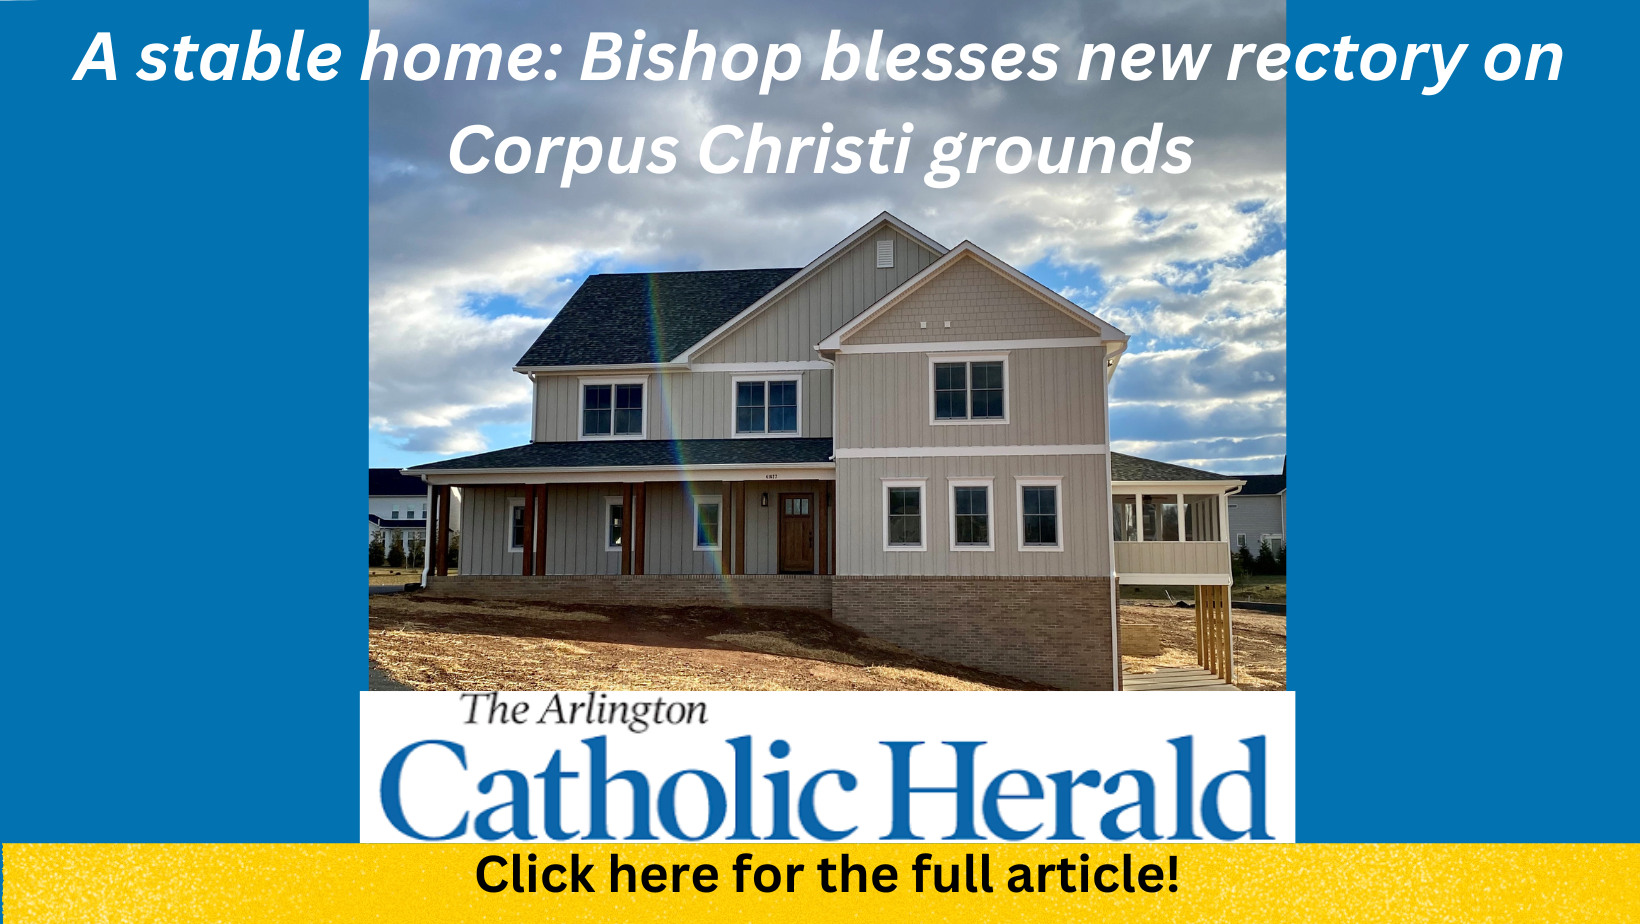 A stable home Bishop blesses new rectory on Corpus Christi grounds